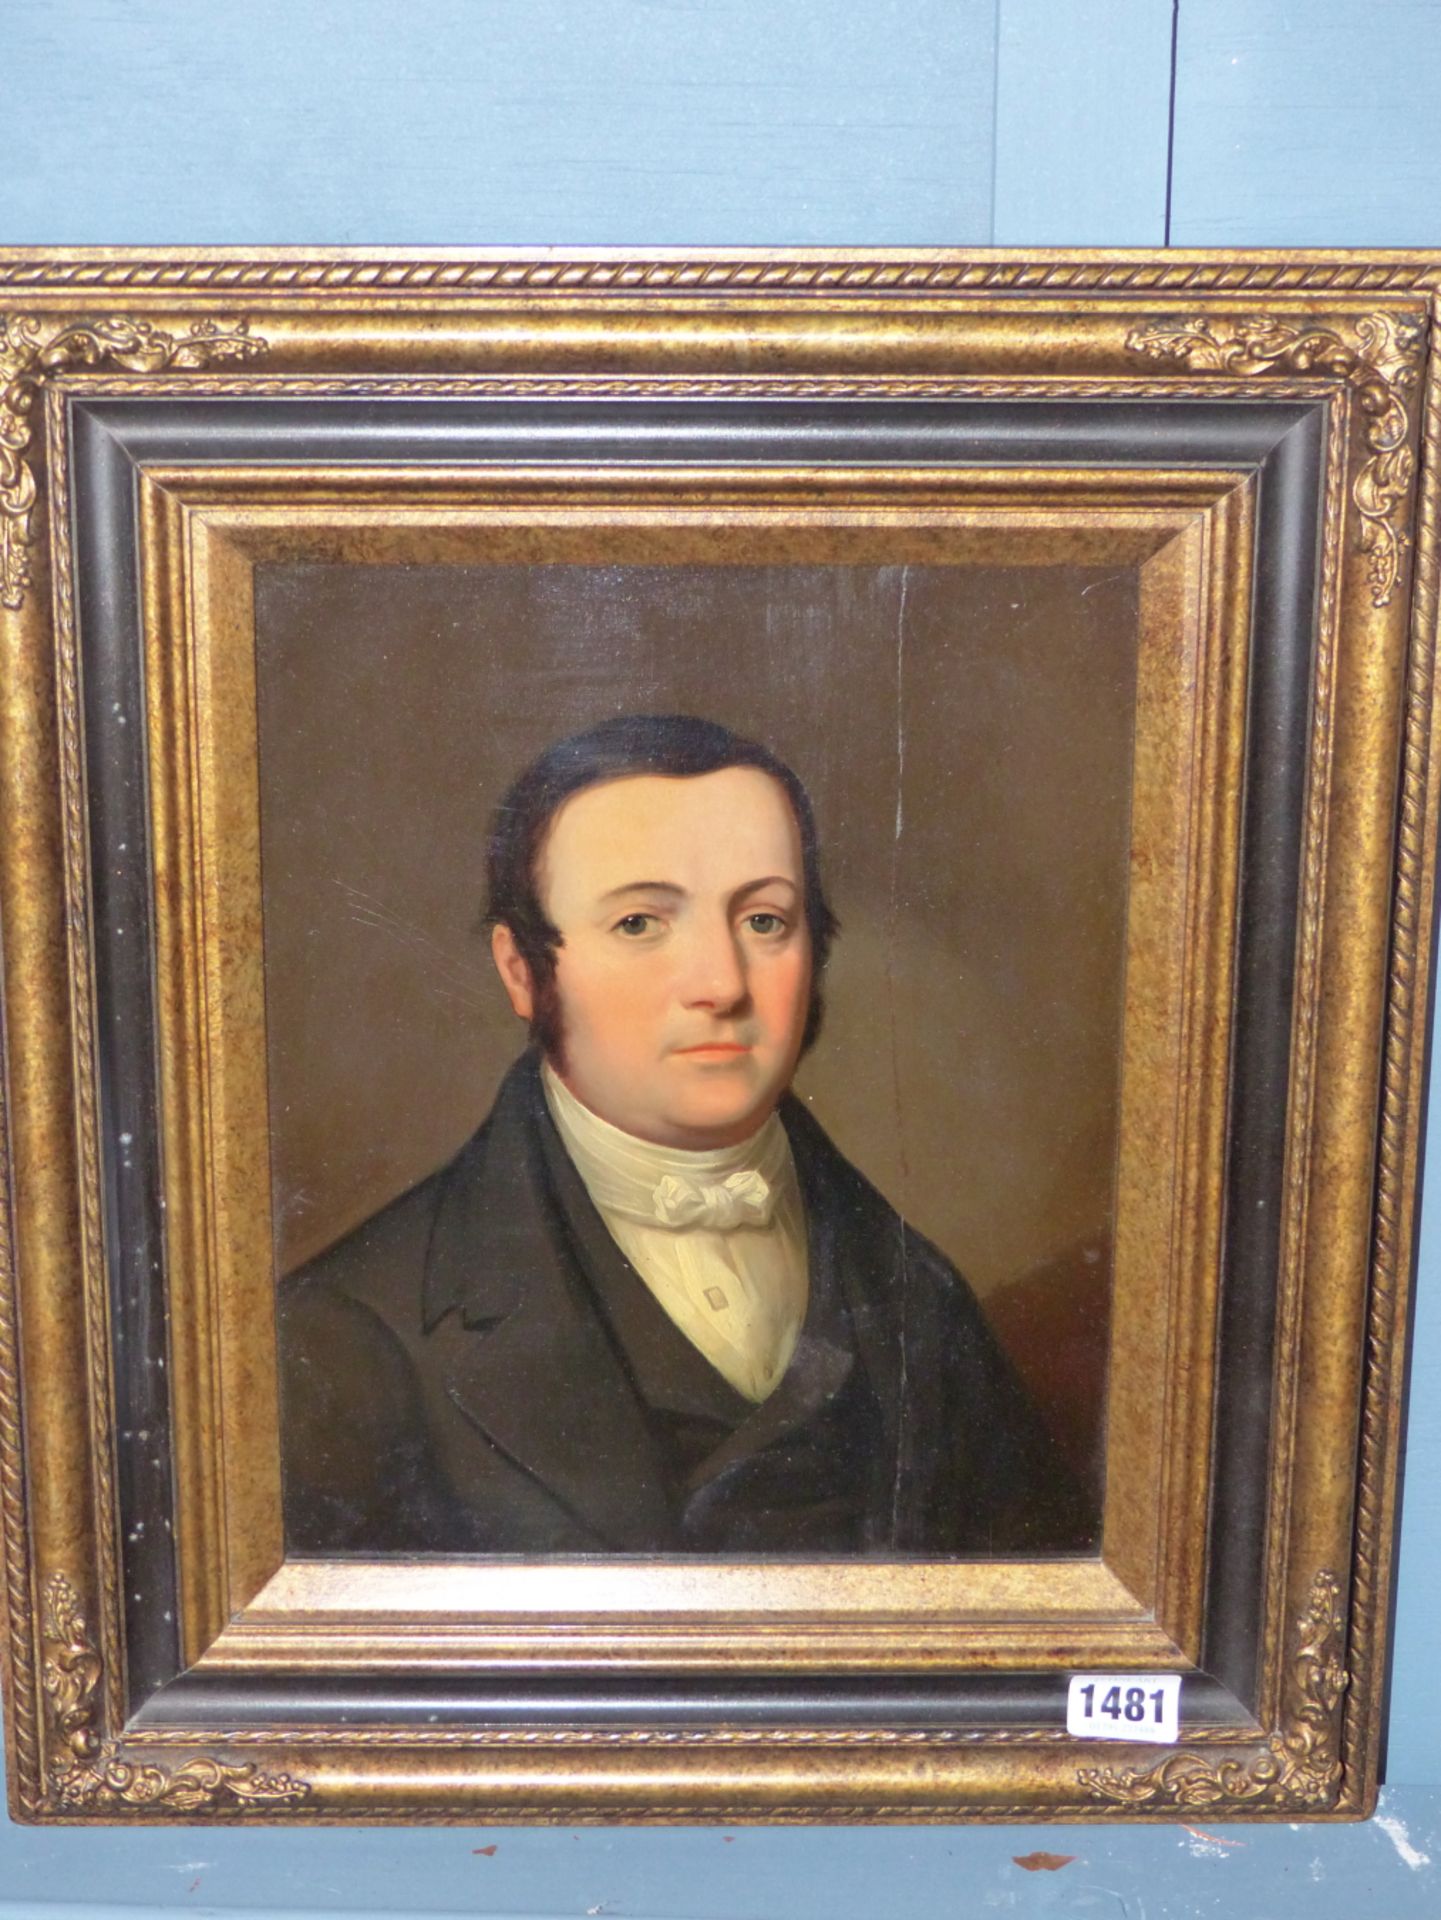 MID 19th C. ENGLISH SCHOOL PORTRAIT OF A GENTLEMAN, OIL ON PANEL. 30 x 25cms - Image 2 of 5